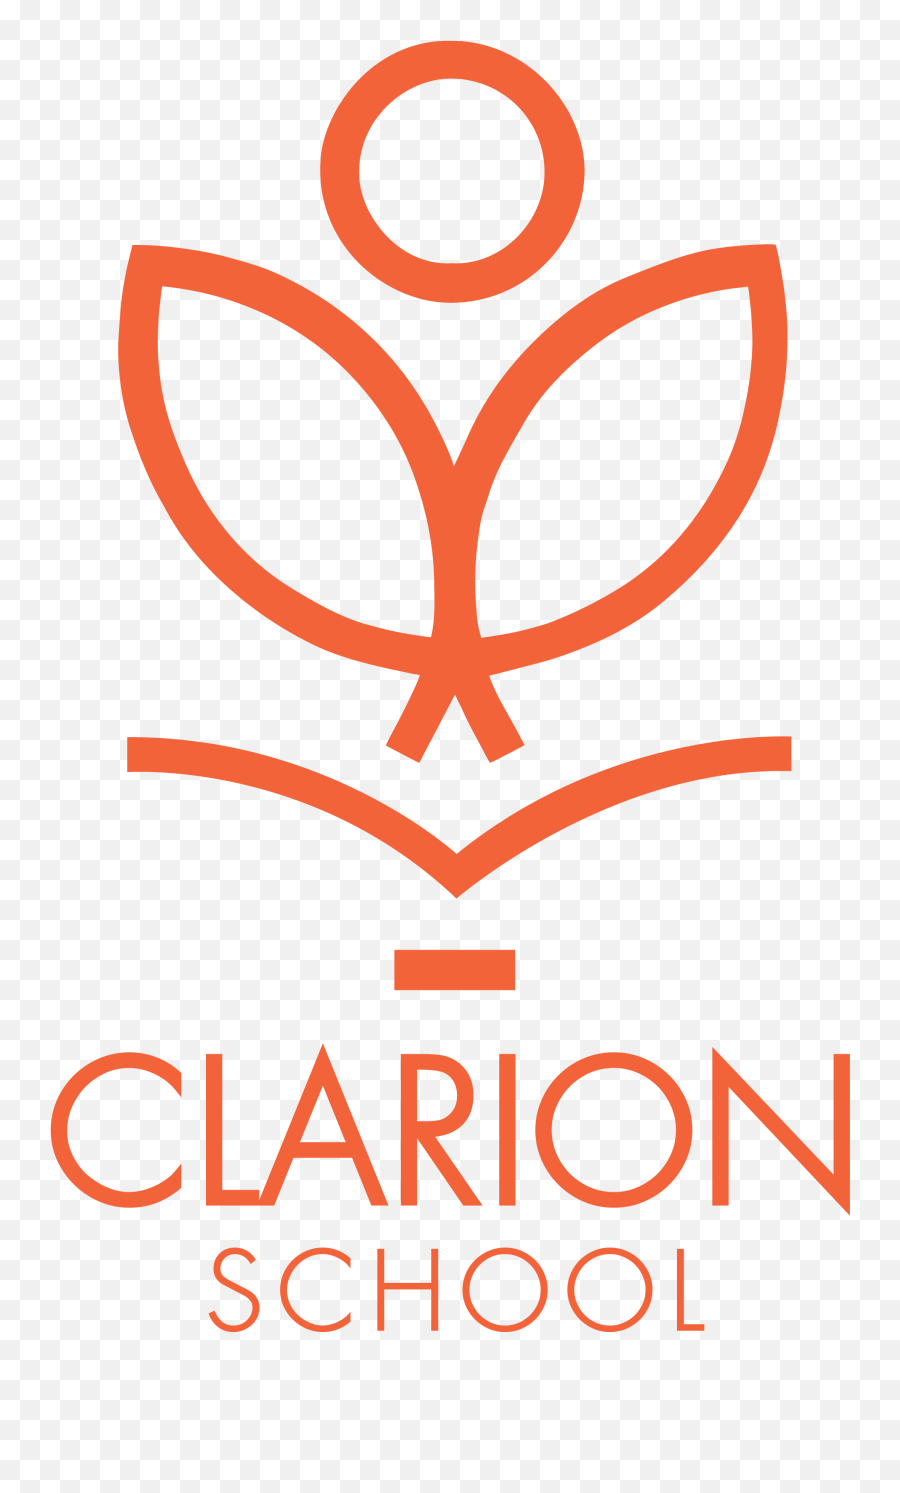 Fileclarion School - Closedtextpng Wikimedia Commons Clarion School,Closed Png